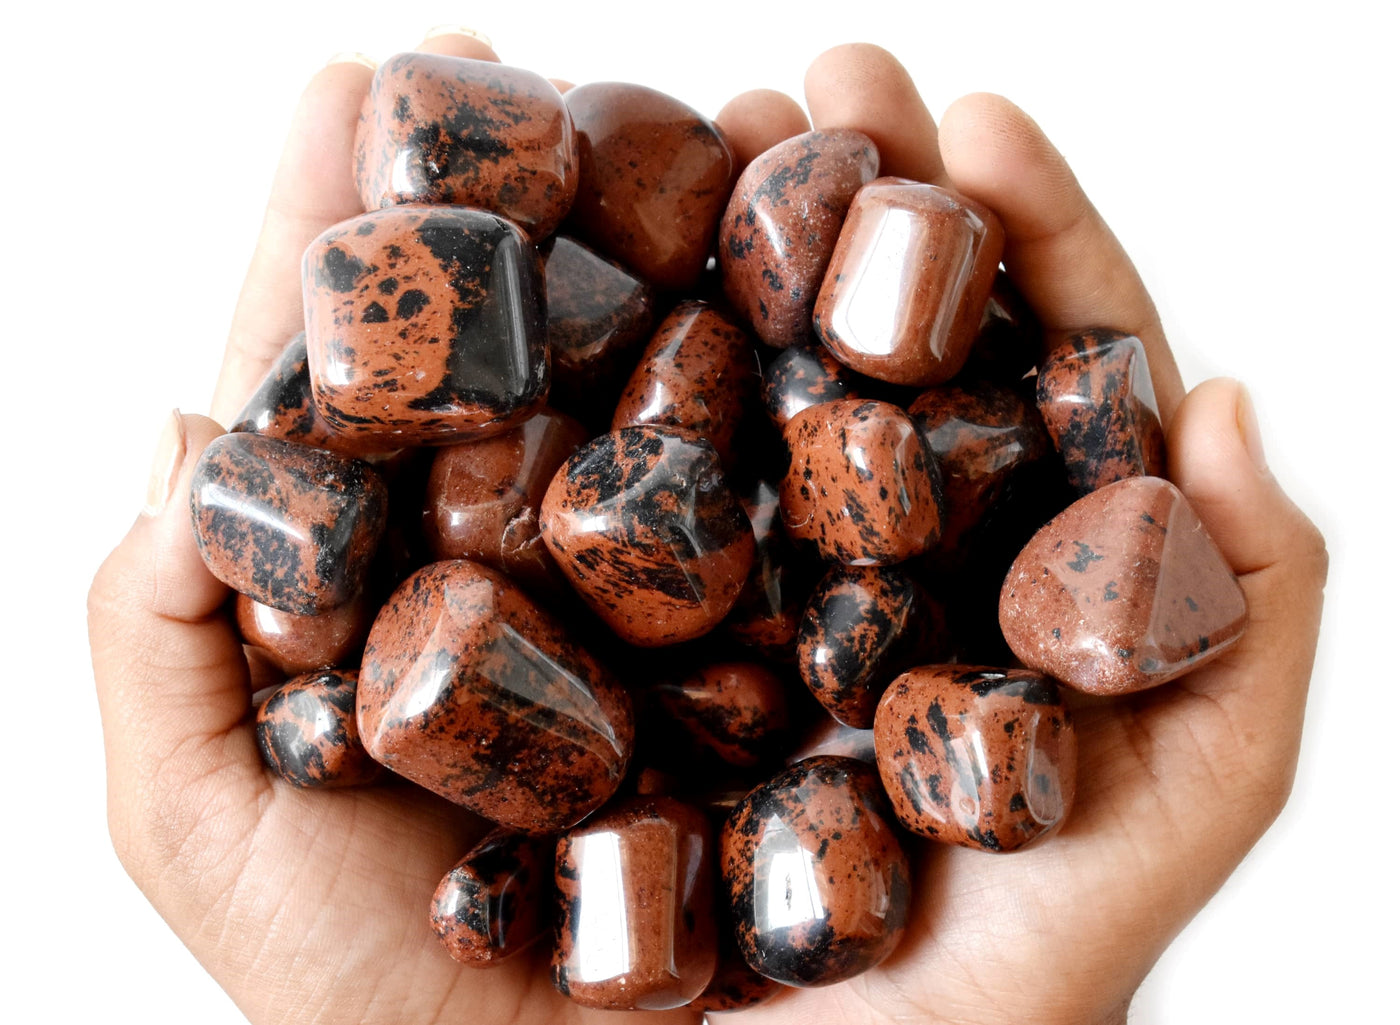 Mahogany Obsidian Tumbled Crystals (Sexuality and Gentle Self-Expression)